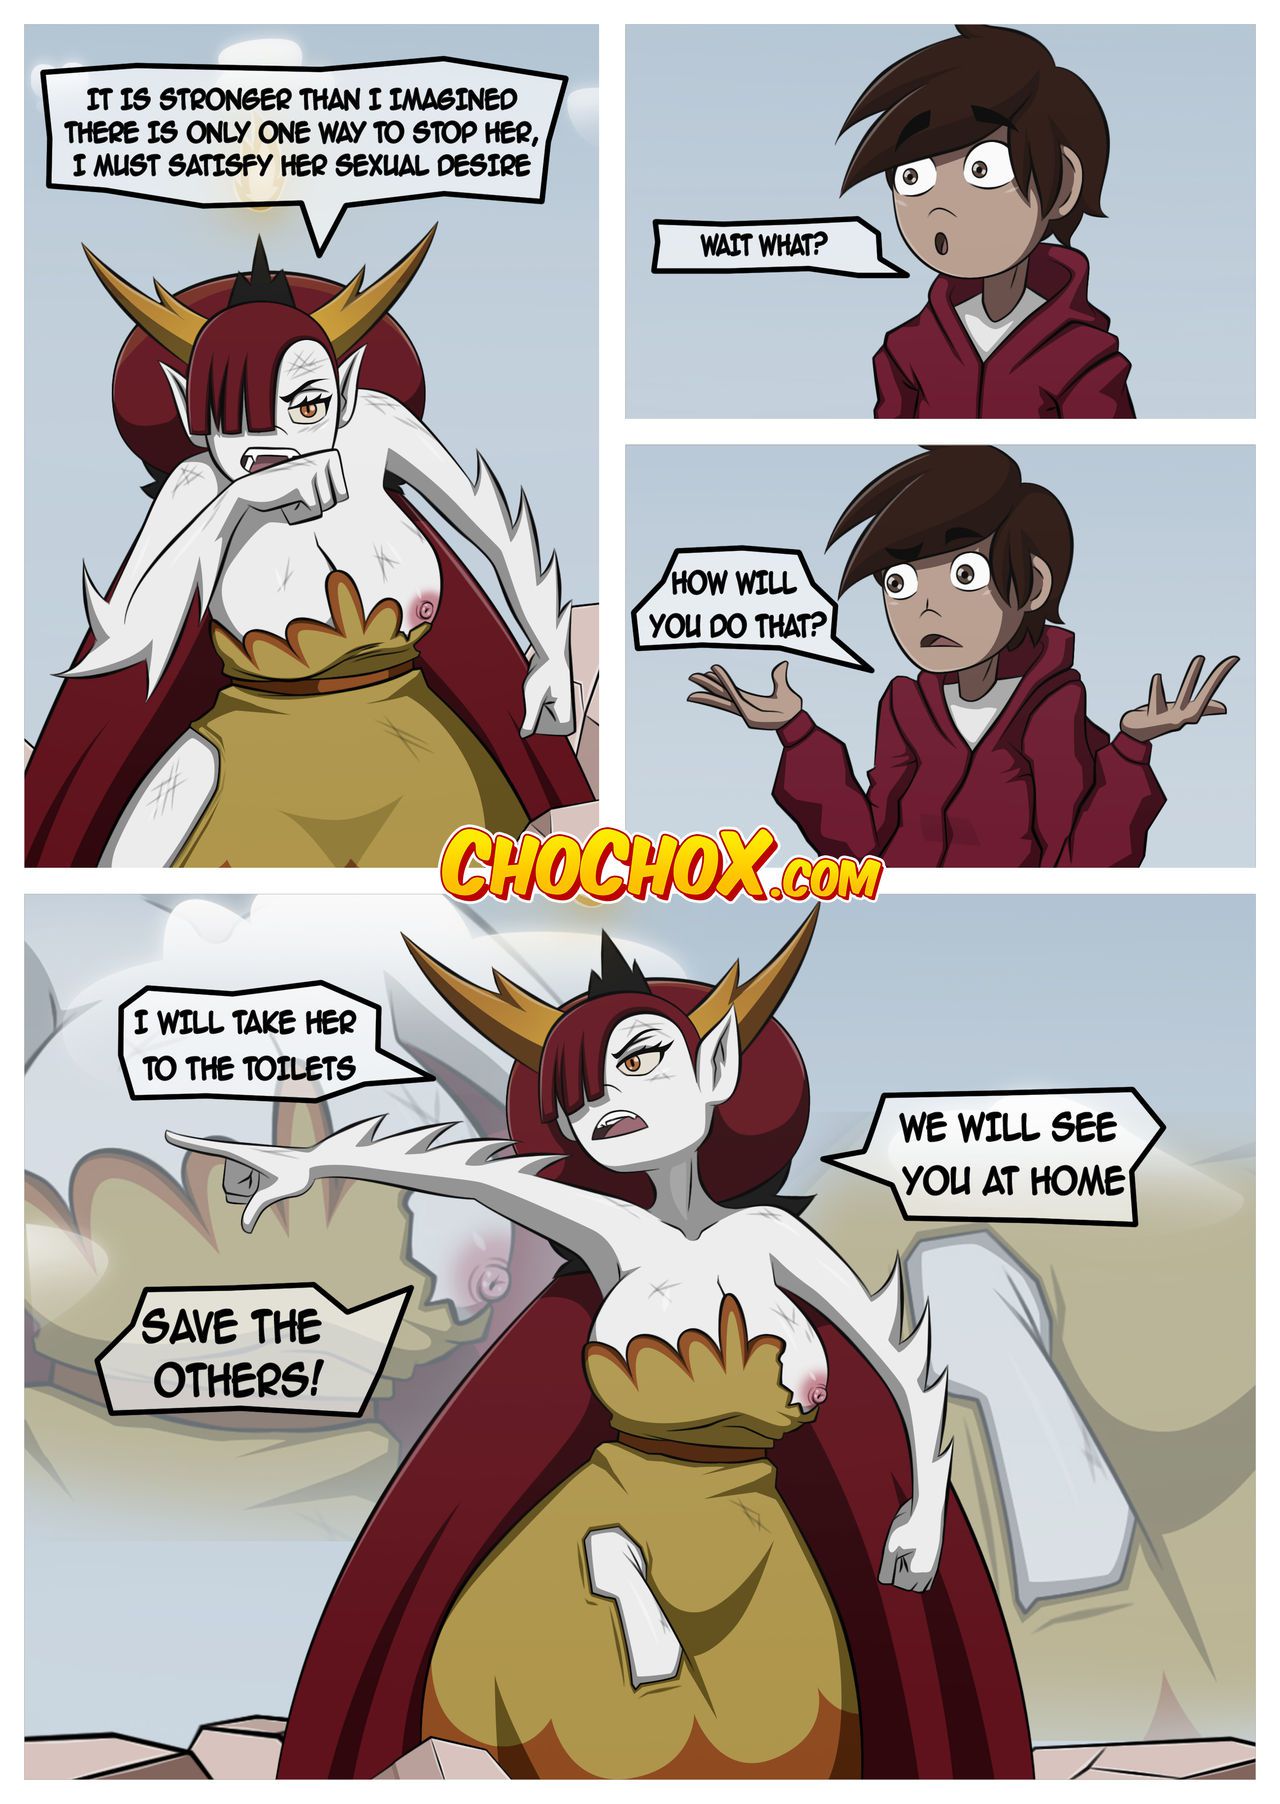 [Crock Comix] Hekapoo Plan’s - Sexberty 1 [ChoChoX] (Star Vs. The Forces of Evil) 8